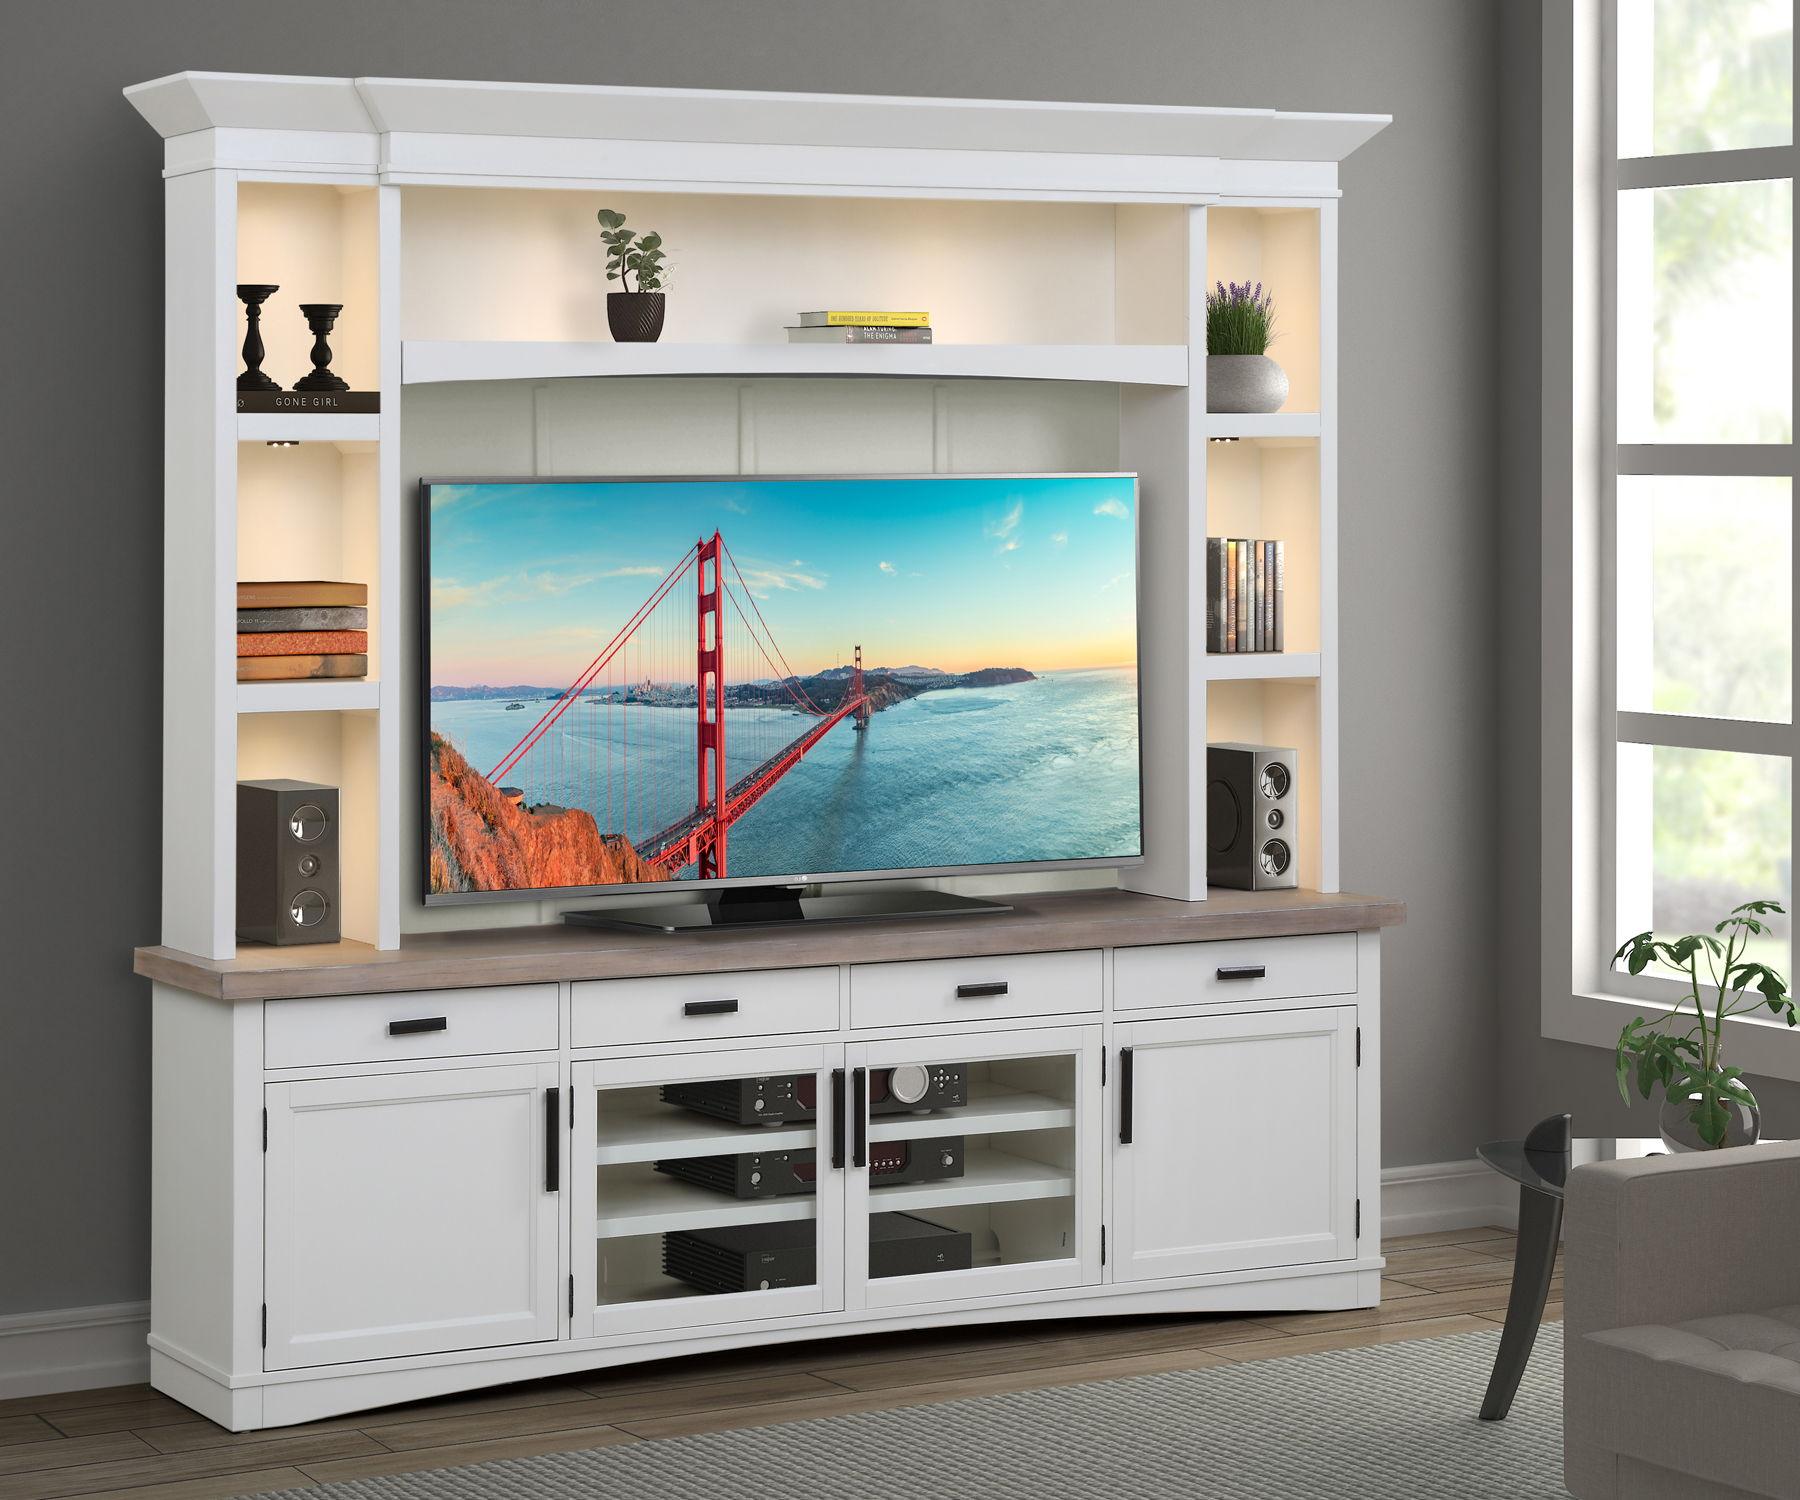 Parker House - Americana Modern - TV Console with Hutch, Backpanel and LED Lights - 5th Avenue Furniture